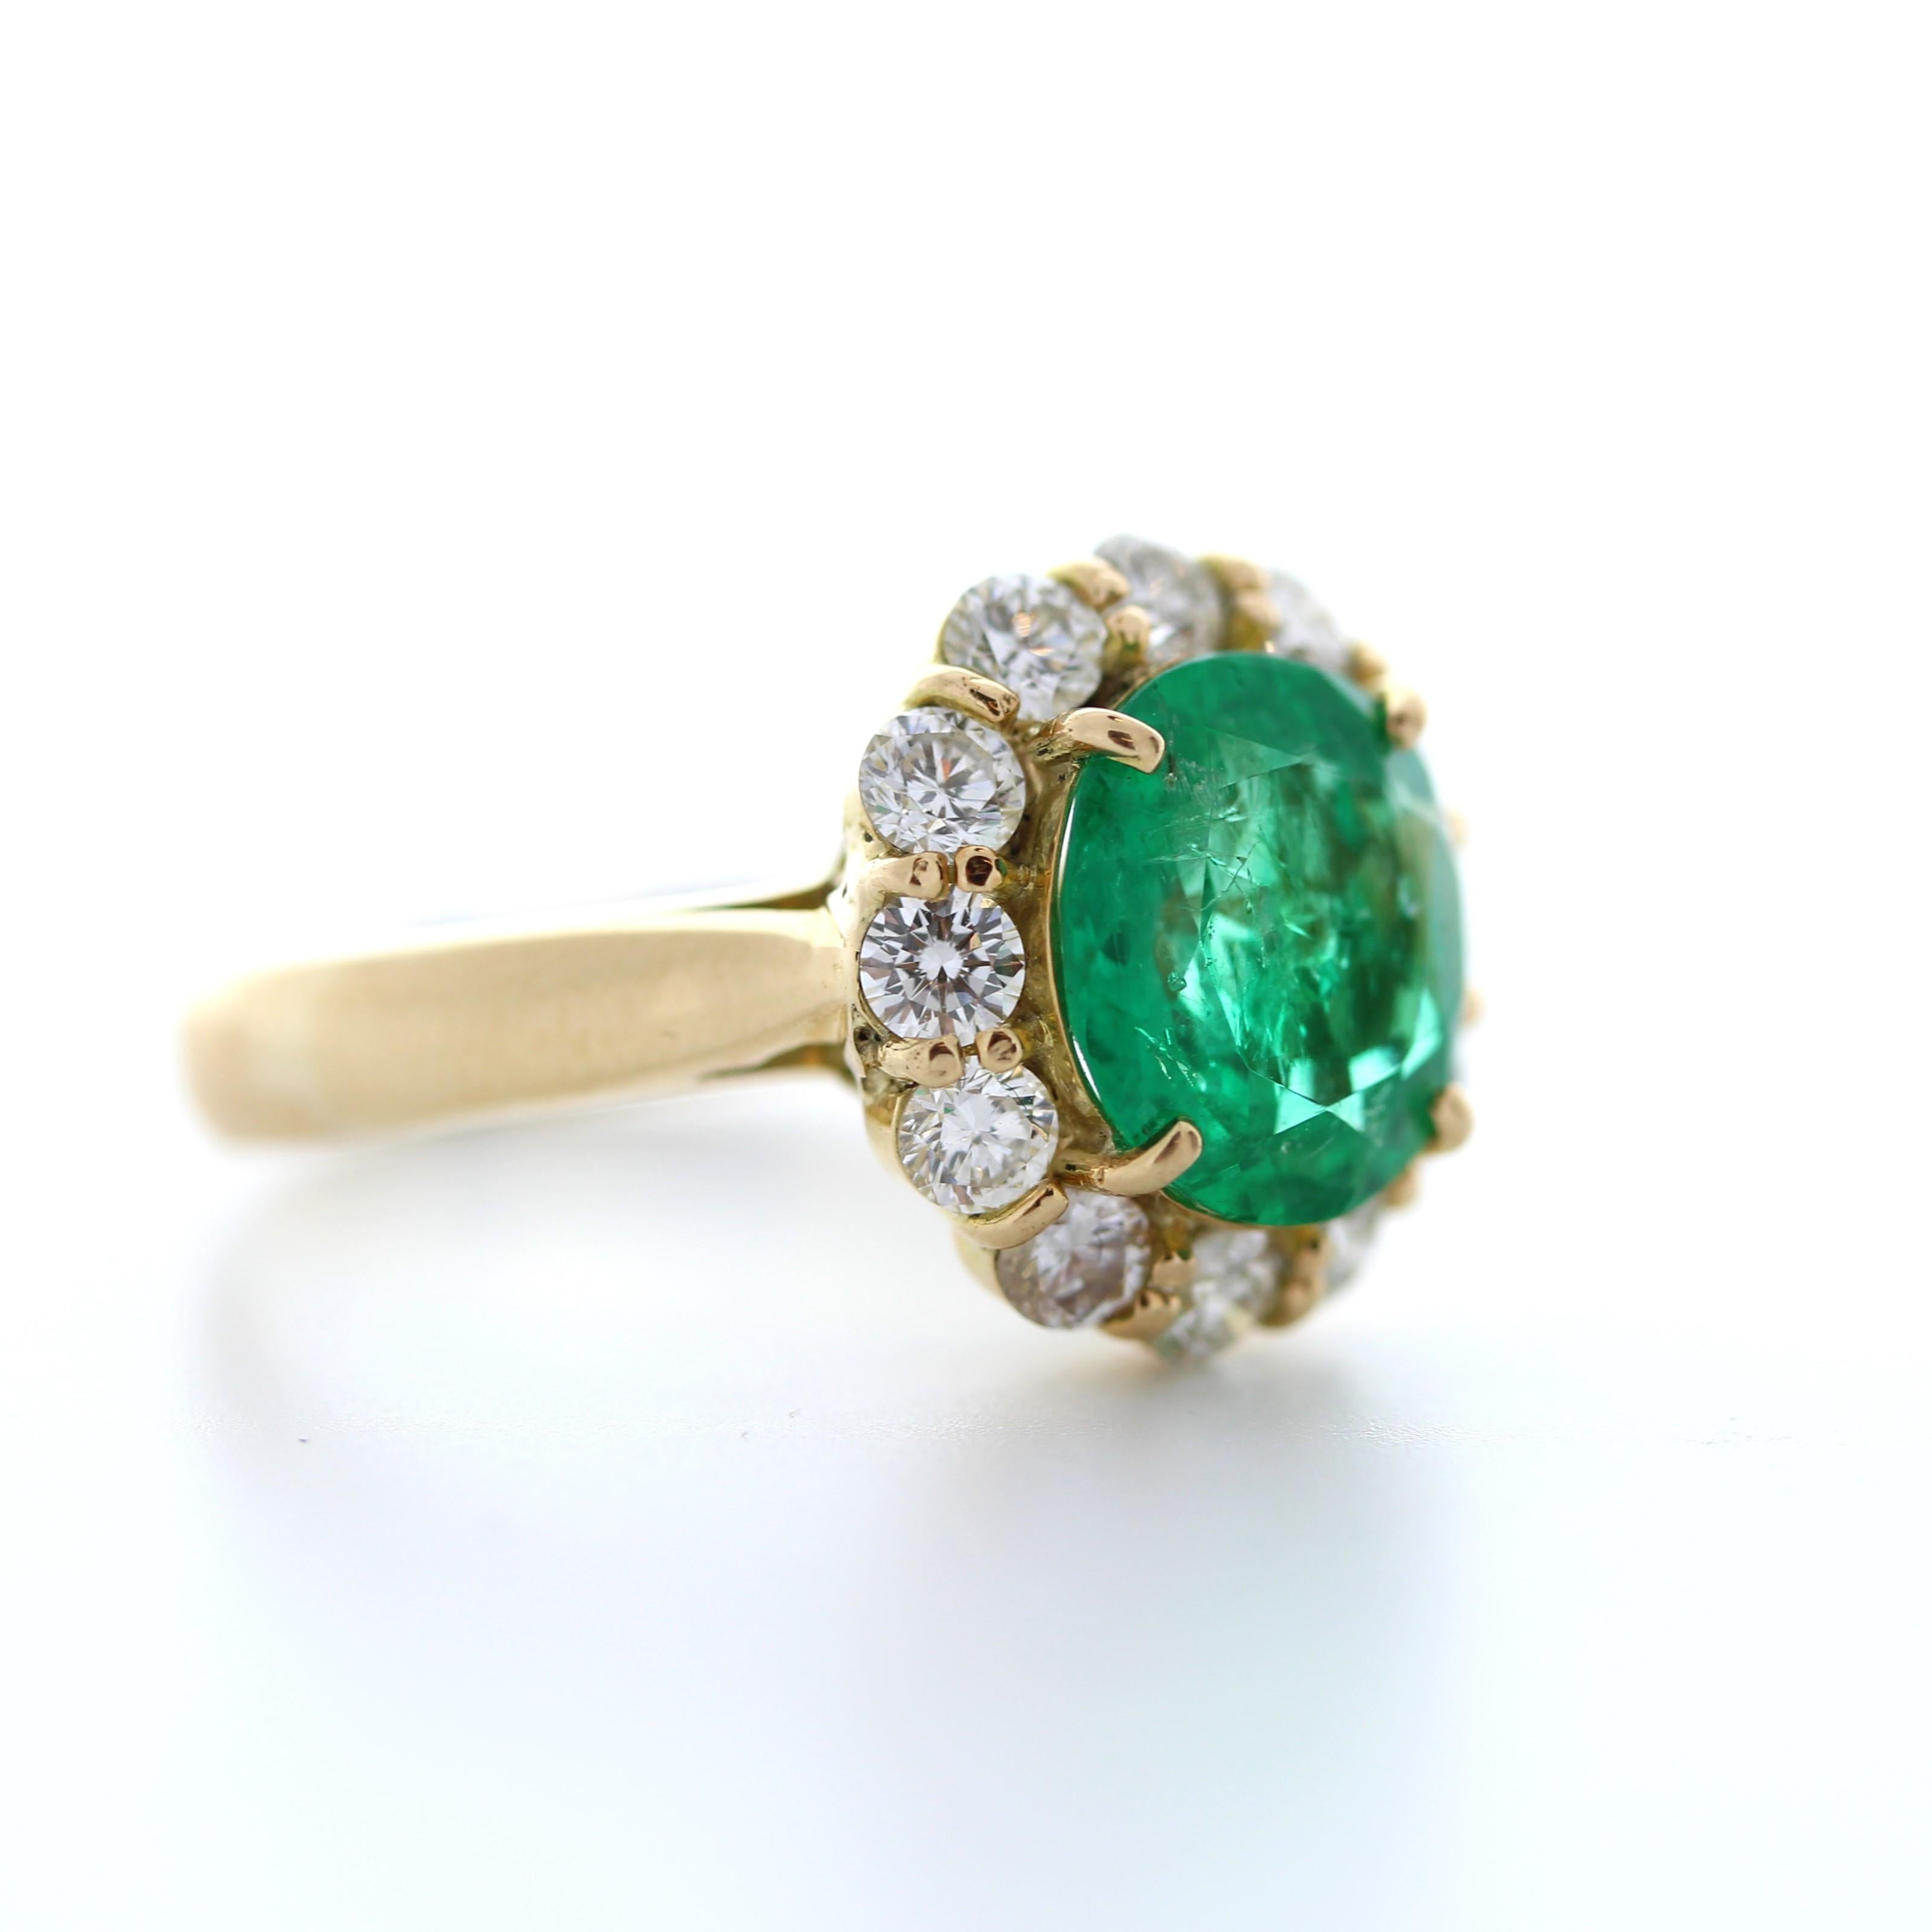 Majestic and elegant, this stunning fashion gemstone ring is spectacular from start to finish. It features a richly green emerald 3.00 carat. The size of this green sapphire is the stunner of the ring. A dazzling array of 0.60 carat 12 round